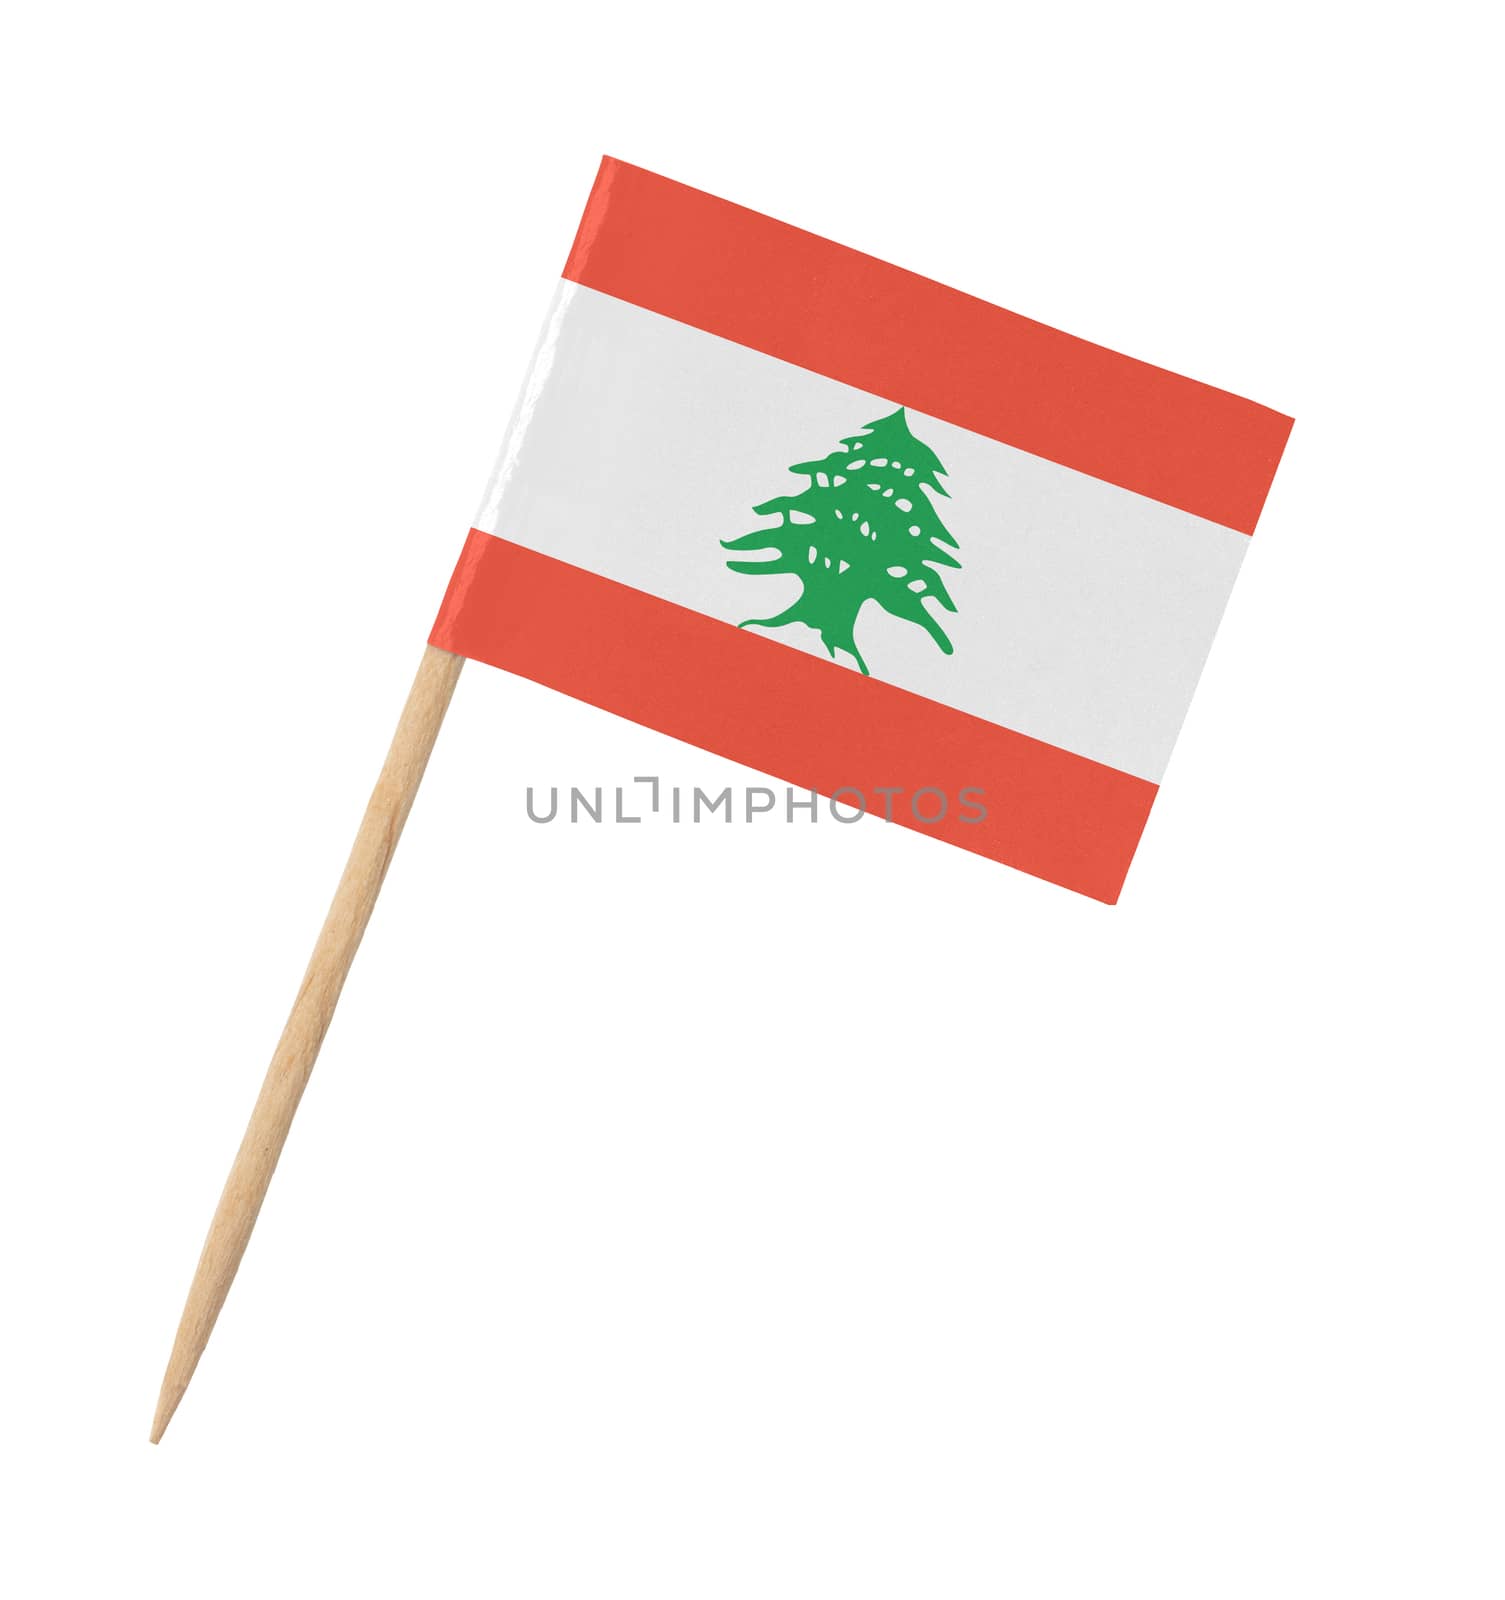 Small paper flag of Lebanon on wooden stick, isolated on white